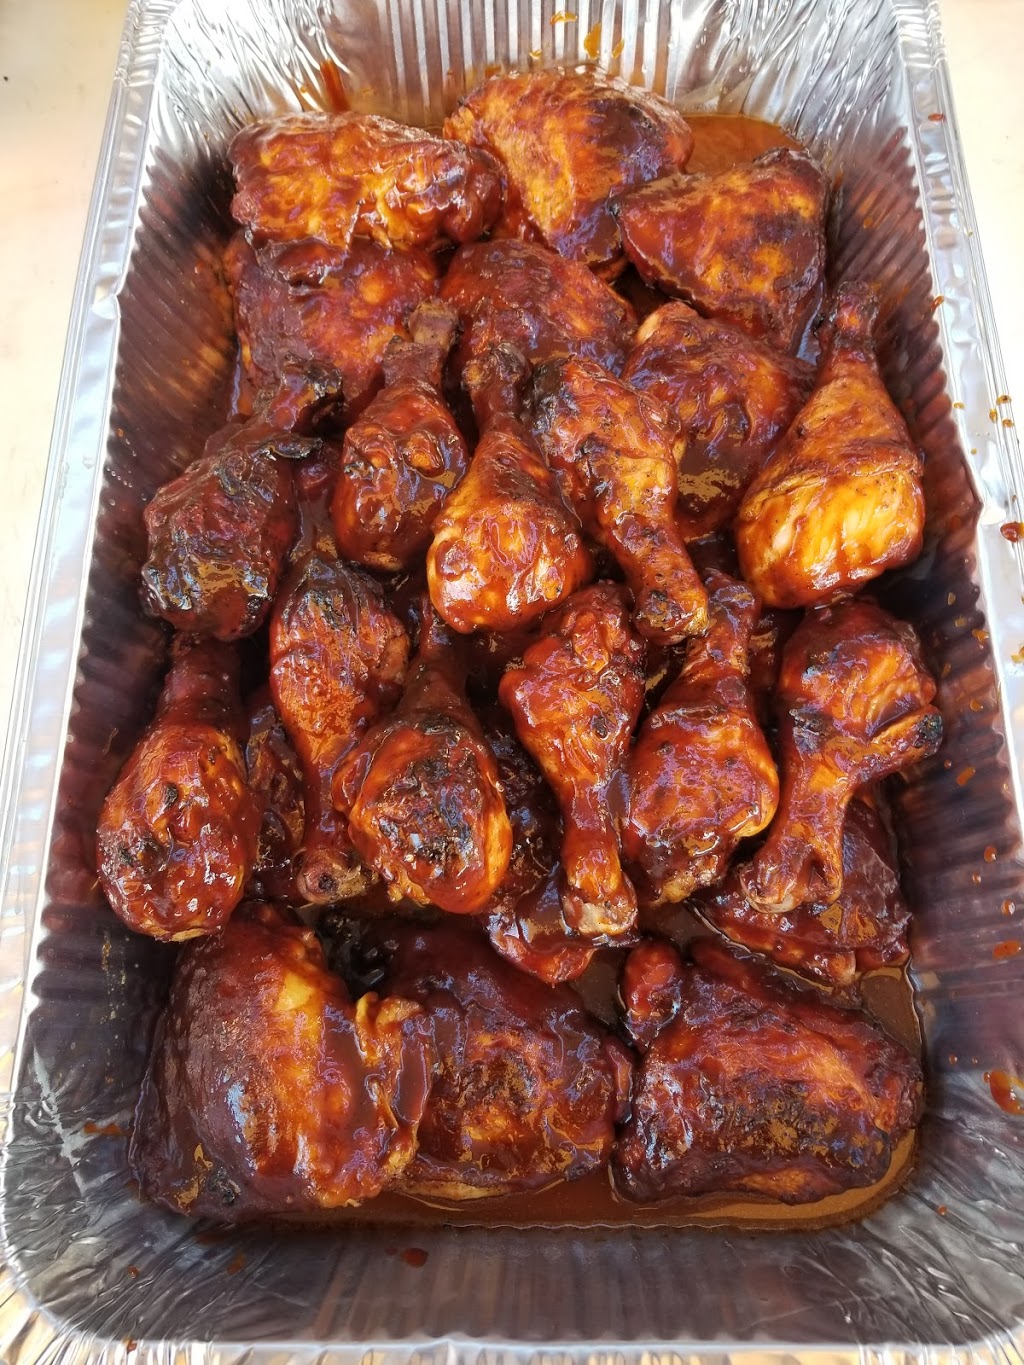 AZBarbeque Catering | 7900 N 70th Ave STE 101, Glendale, AZ 85303 | Phone: (602) 363-5196